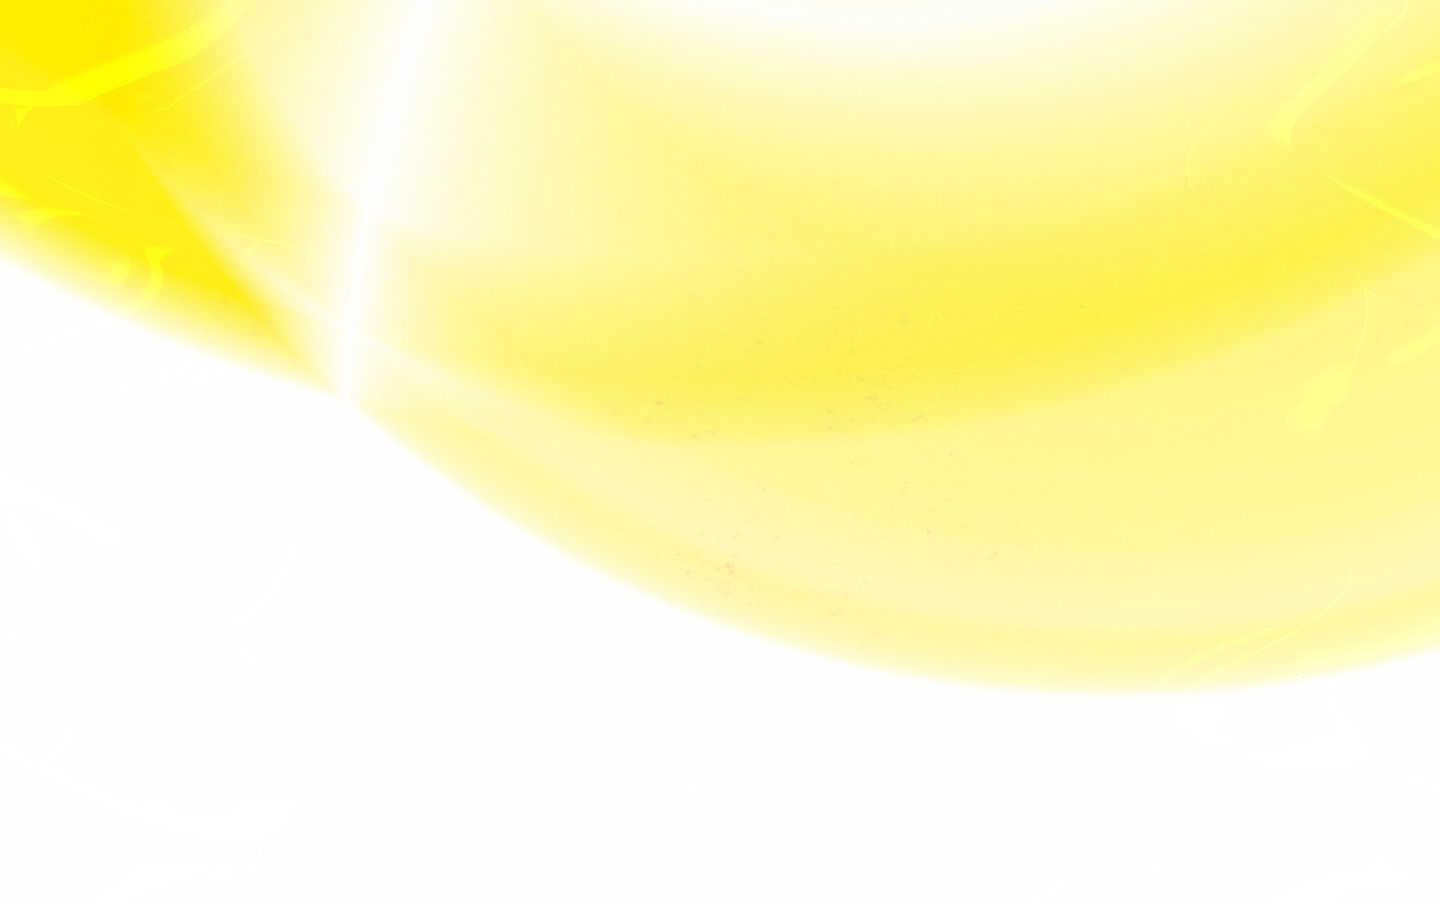 Light yellow abstract backgrounds